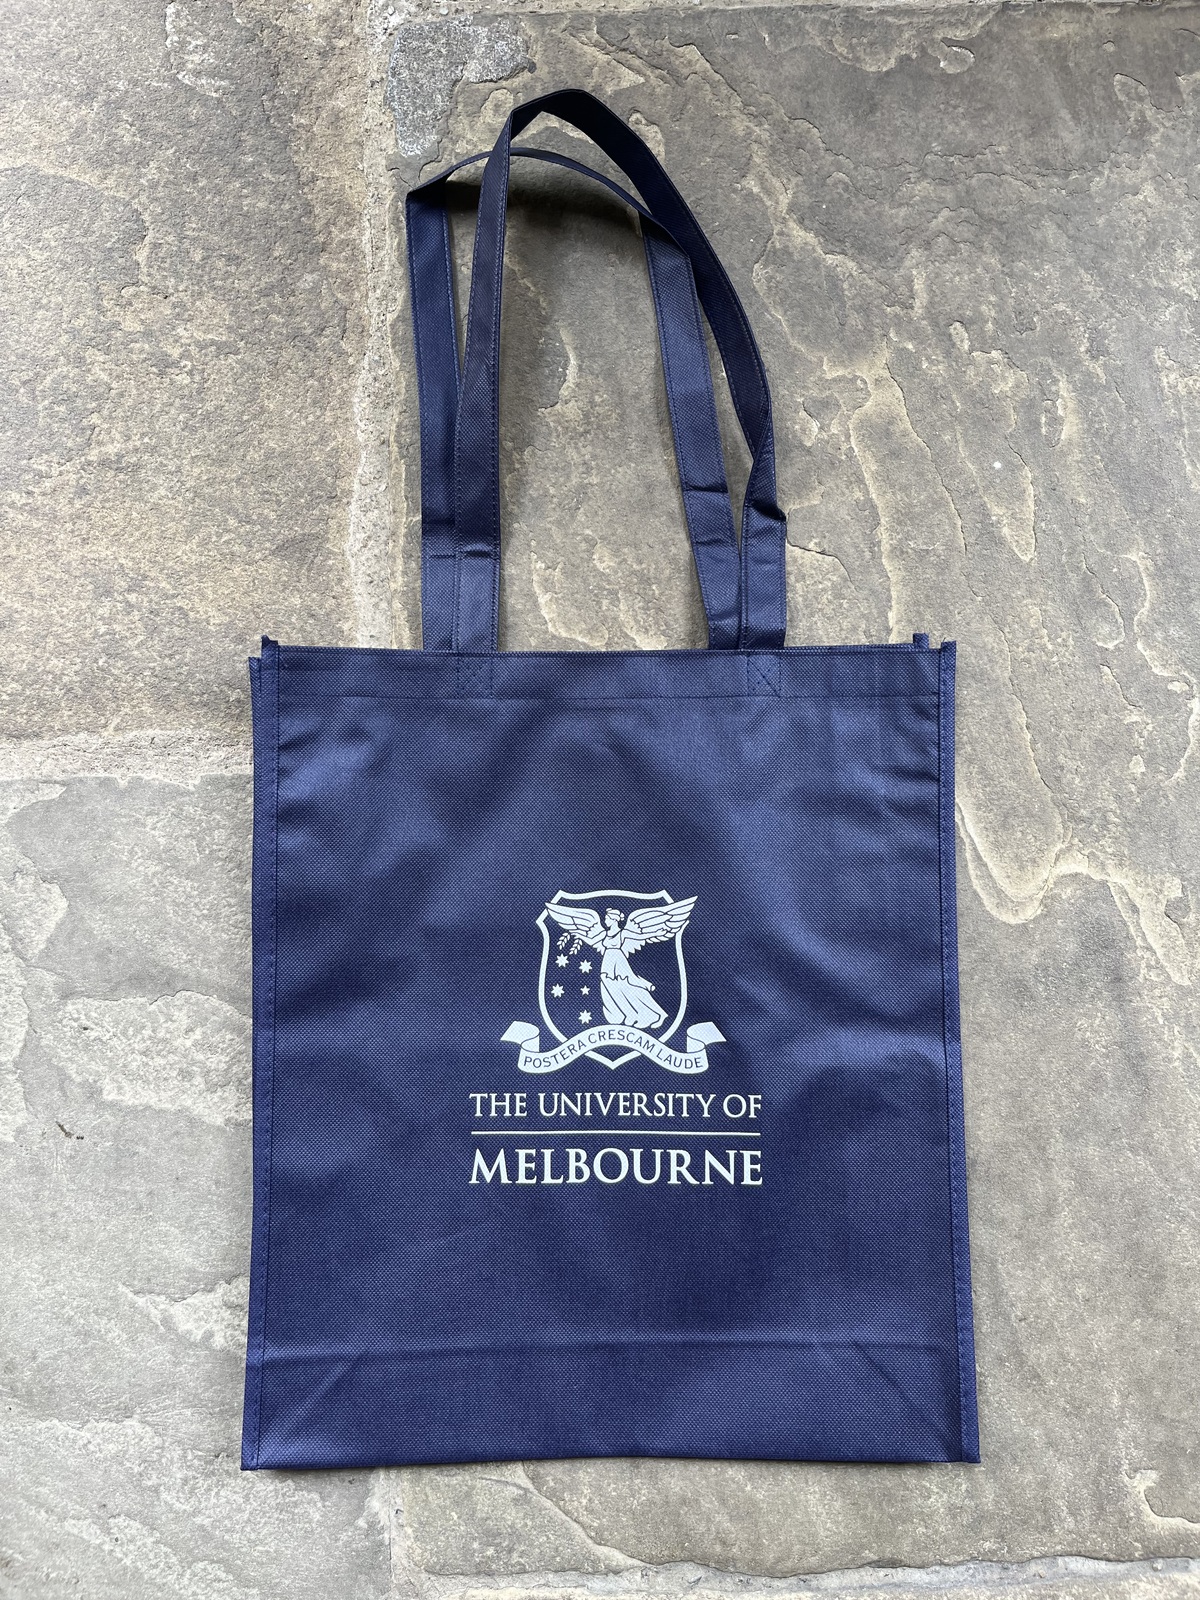 Conference Tote Bag